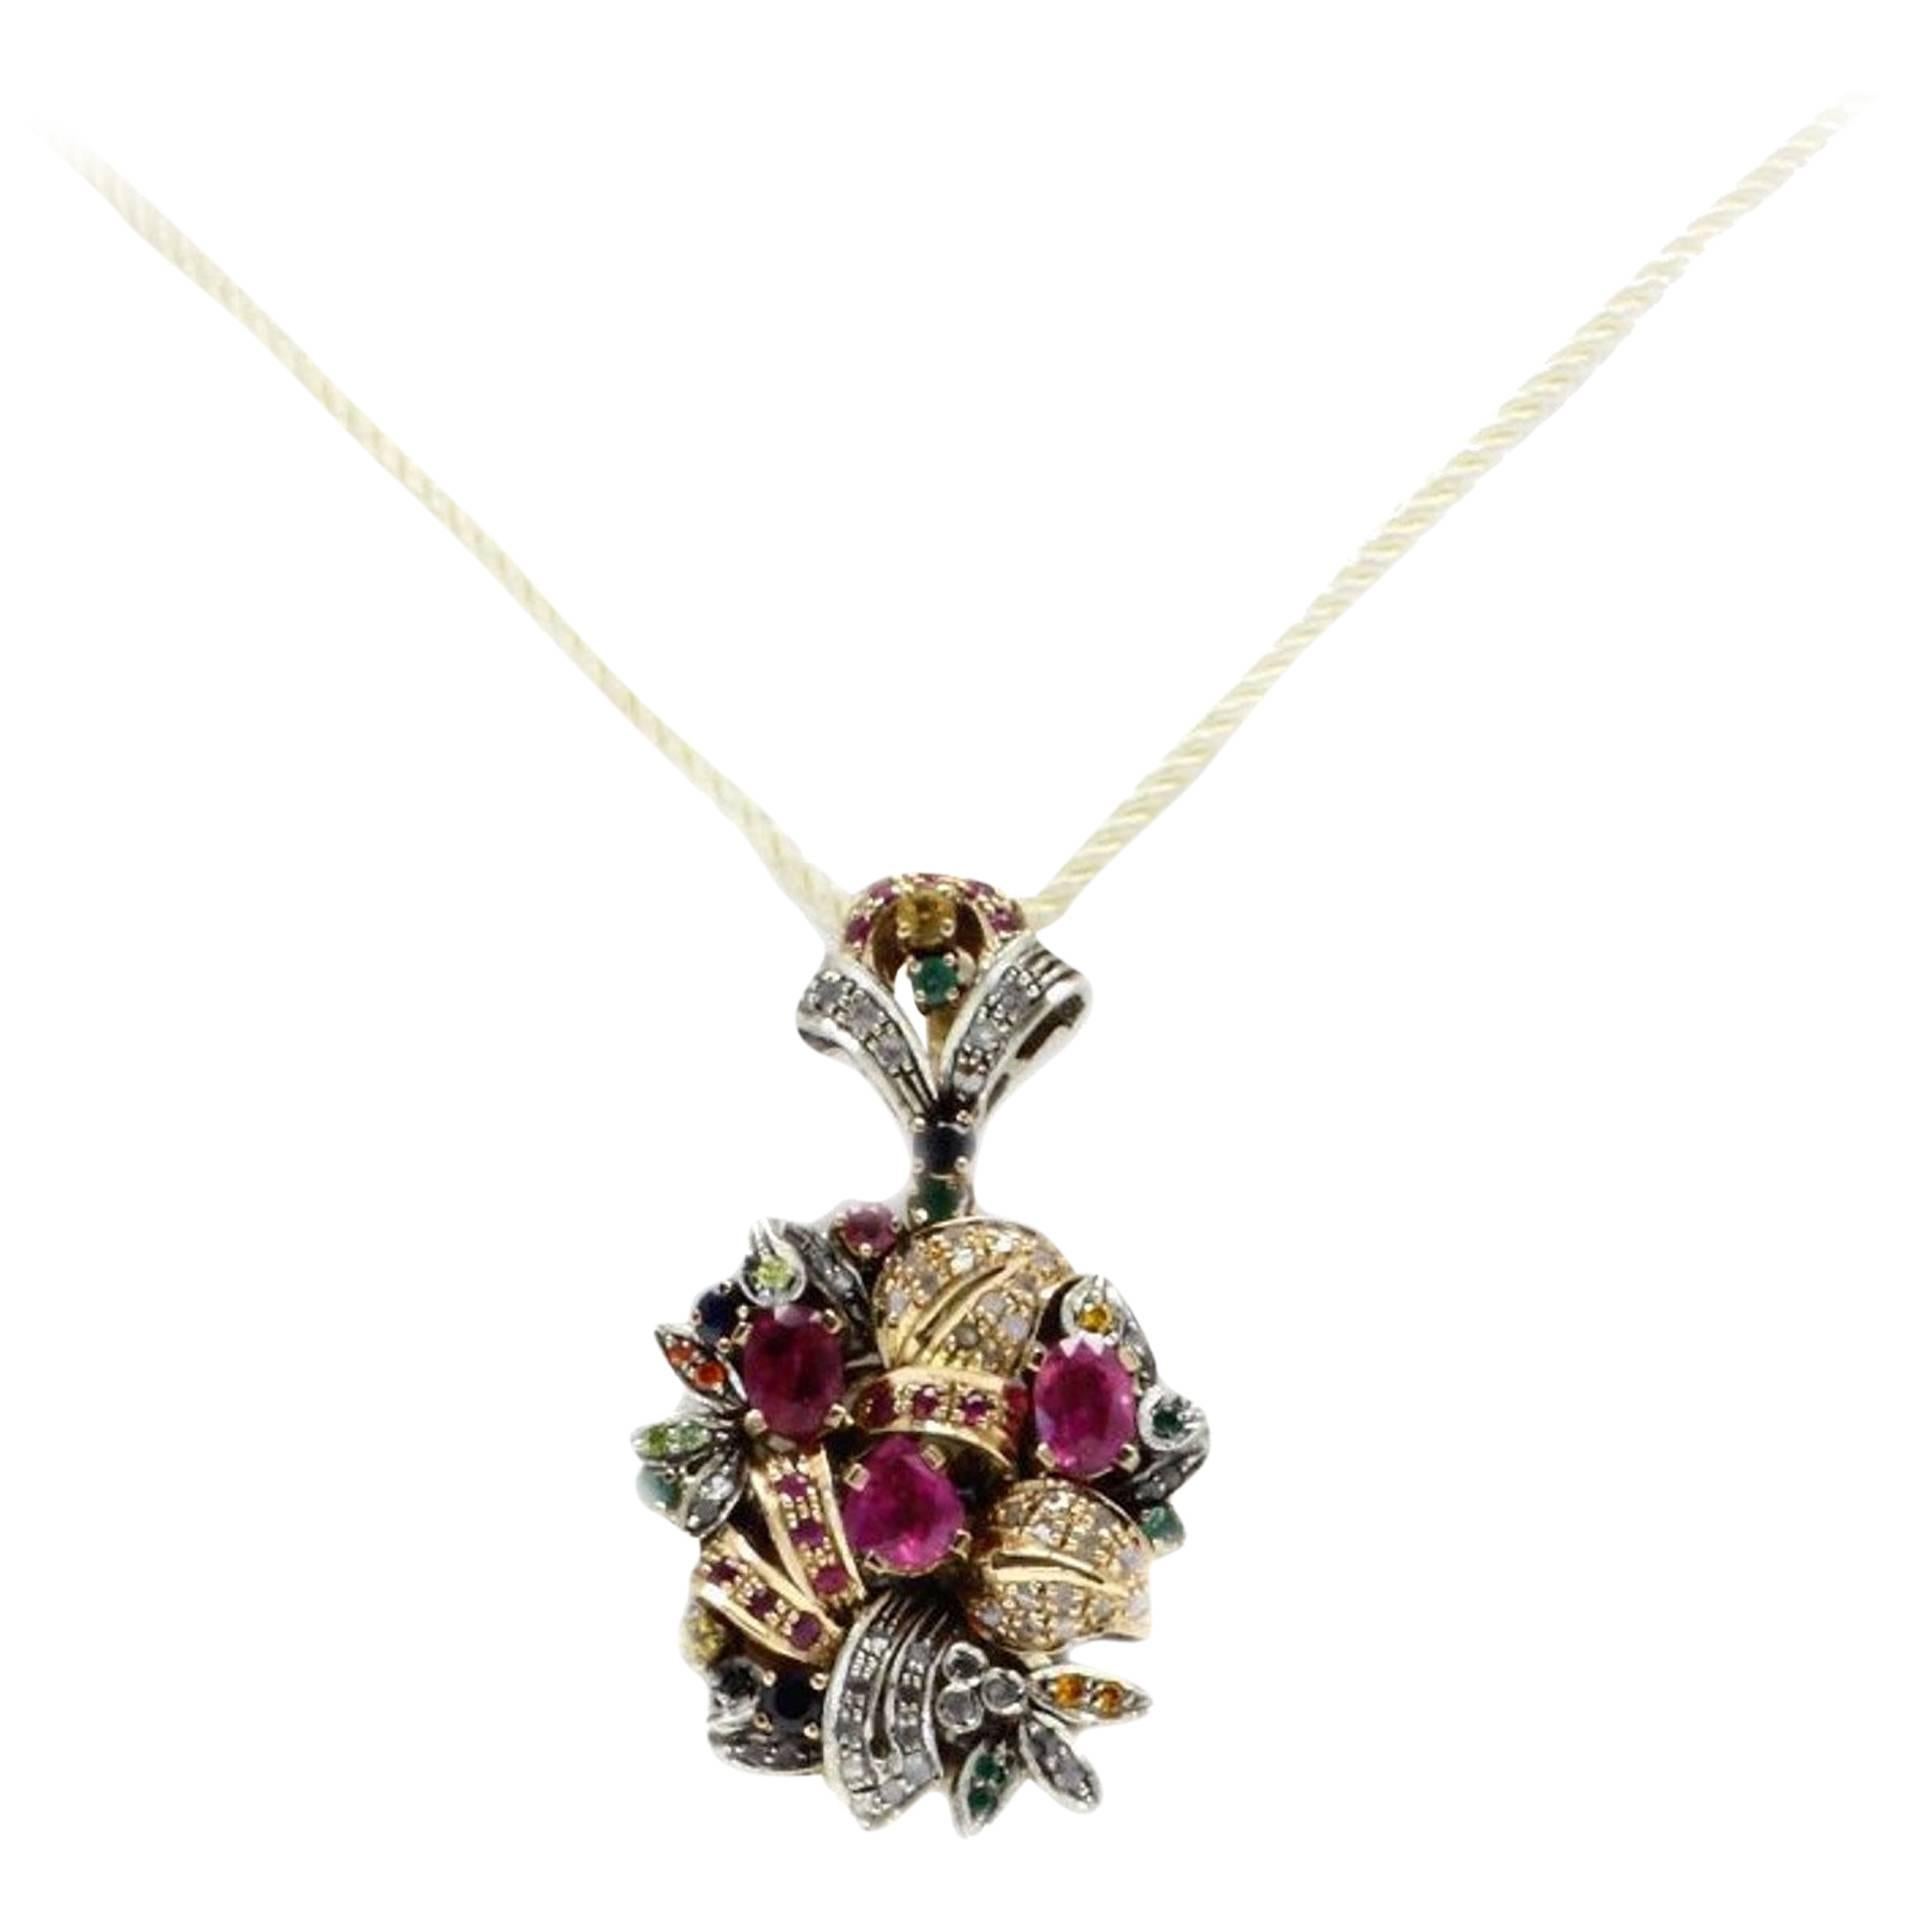 Classic pendand necklace in 9Kt rose gold and silver, adorned with diamonds, emeralds, rubies, blue sapphires and other multicolor hard stones.
Diamonds (0.45 ct )
Emeralds, Rubies,Sapphires(5.61 ct)
Multi color hard stones 0.10 gr
Tot weight 16.3